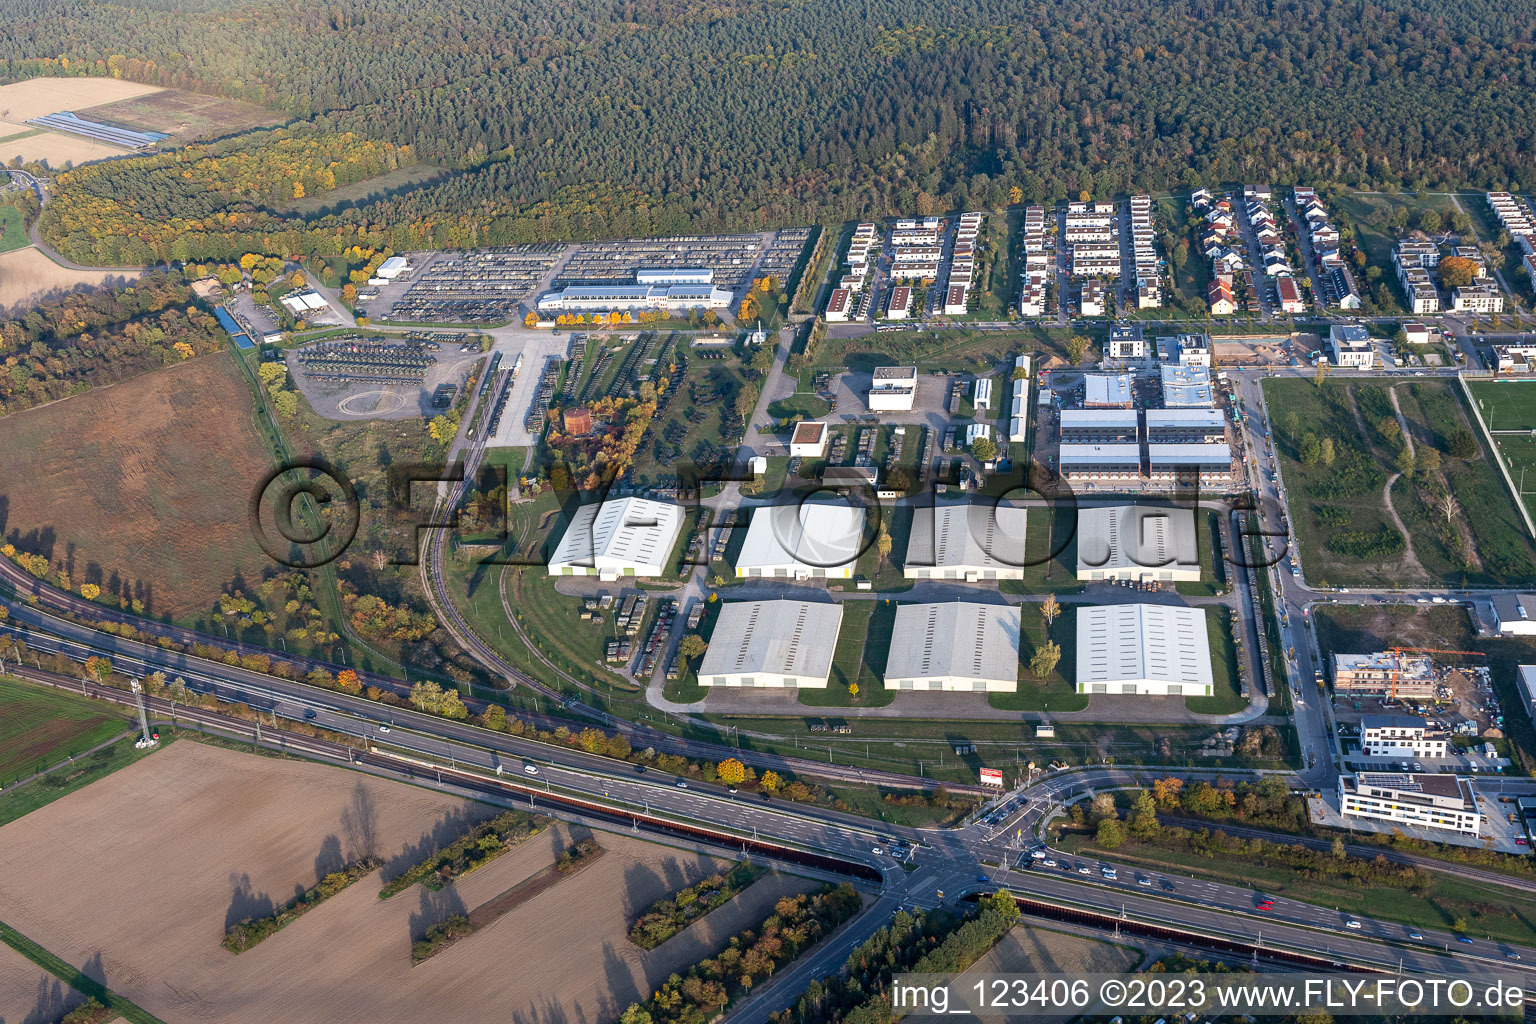 Bundeswehr depot in the district Neureut in Karlsruhe in the state Baden-Wuerttemberg, Germany